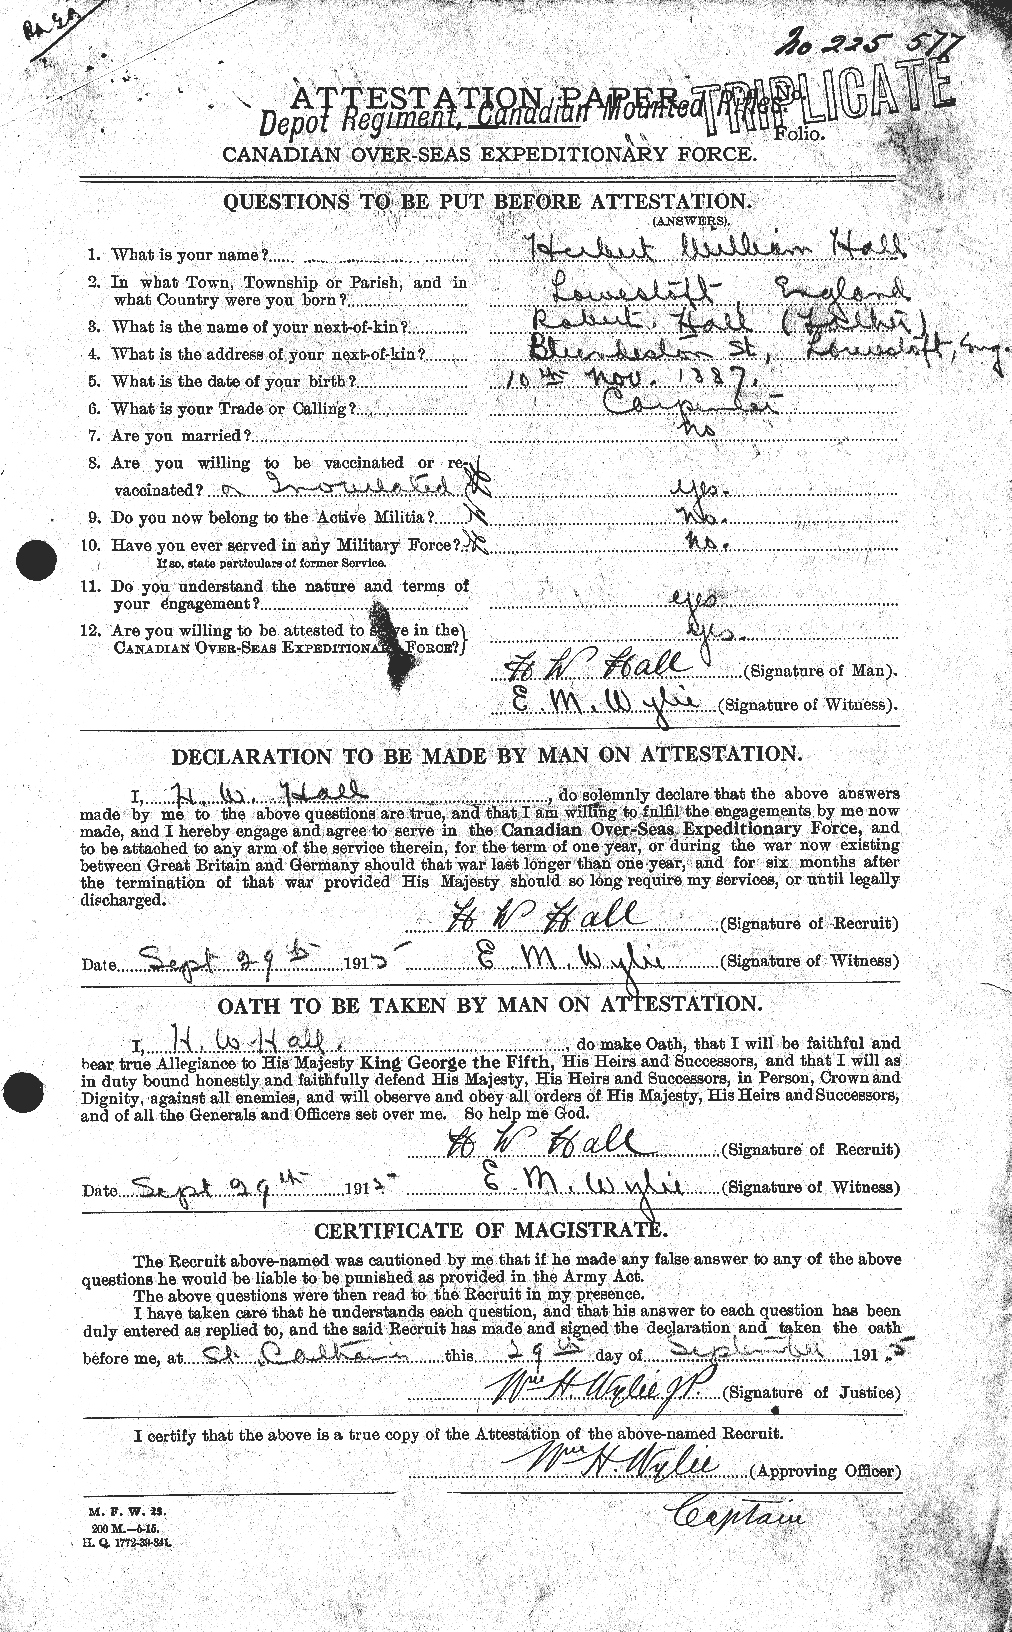 Personnel Records of the First World War - CEF 374149a